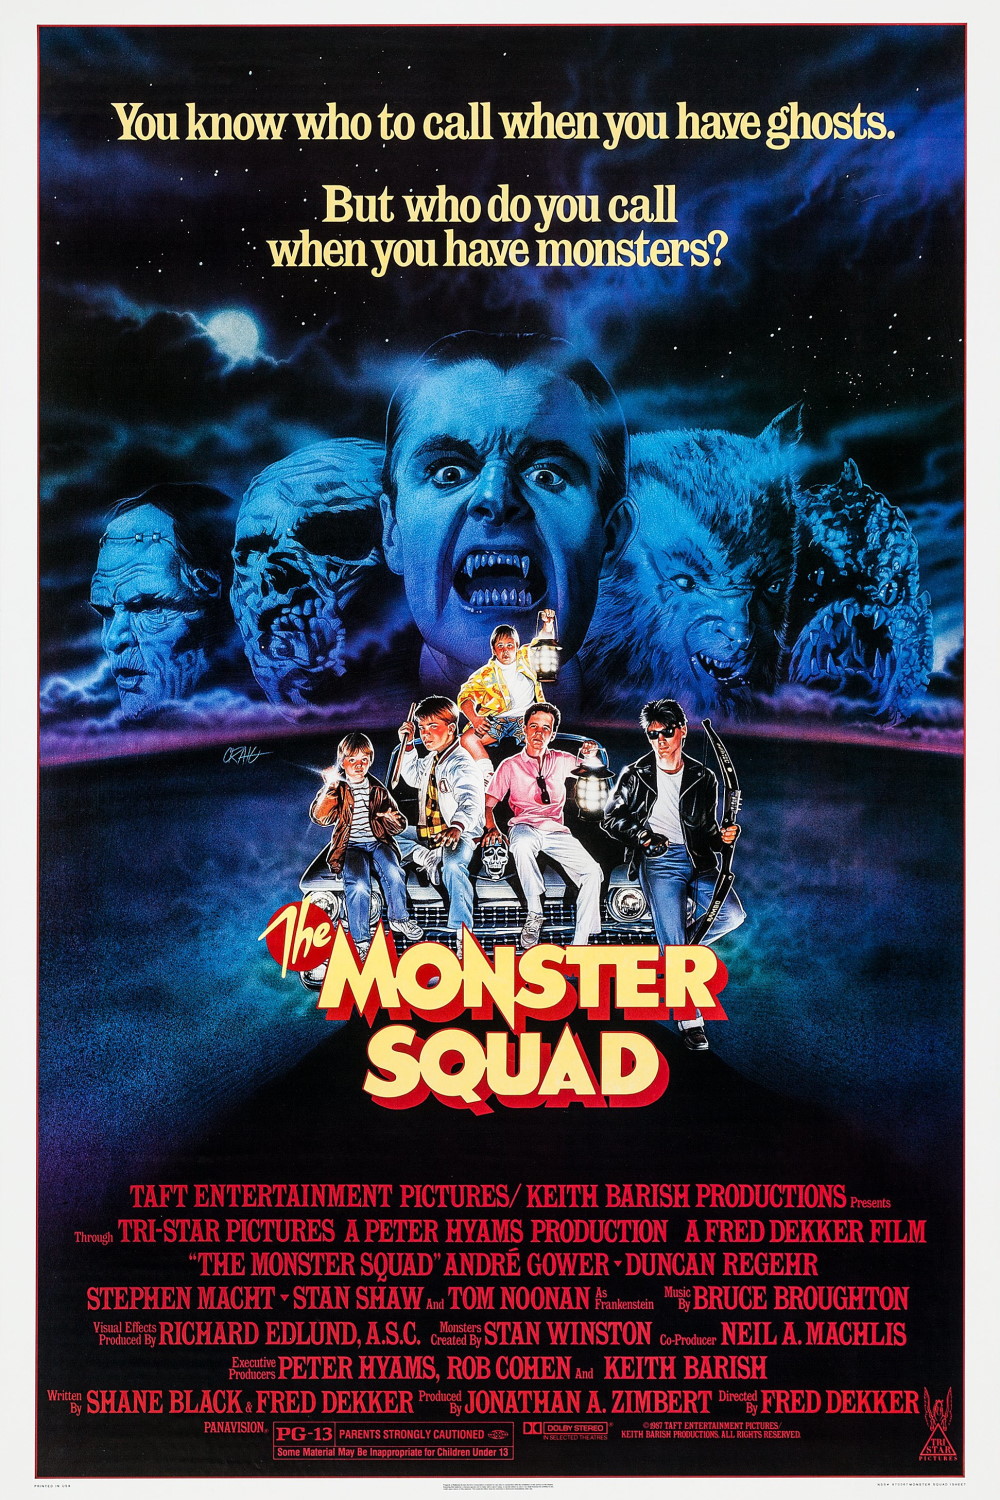 The Monster Squad (1987) Poster